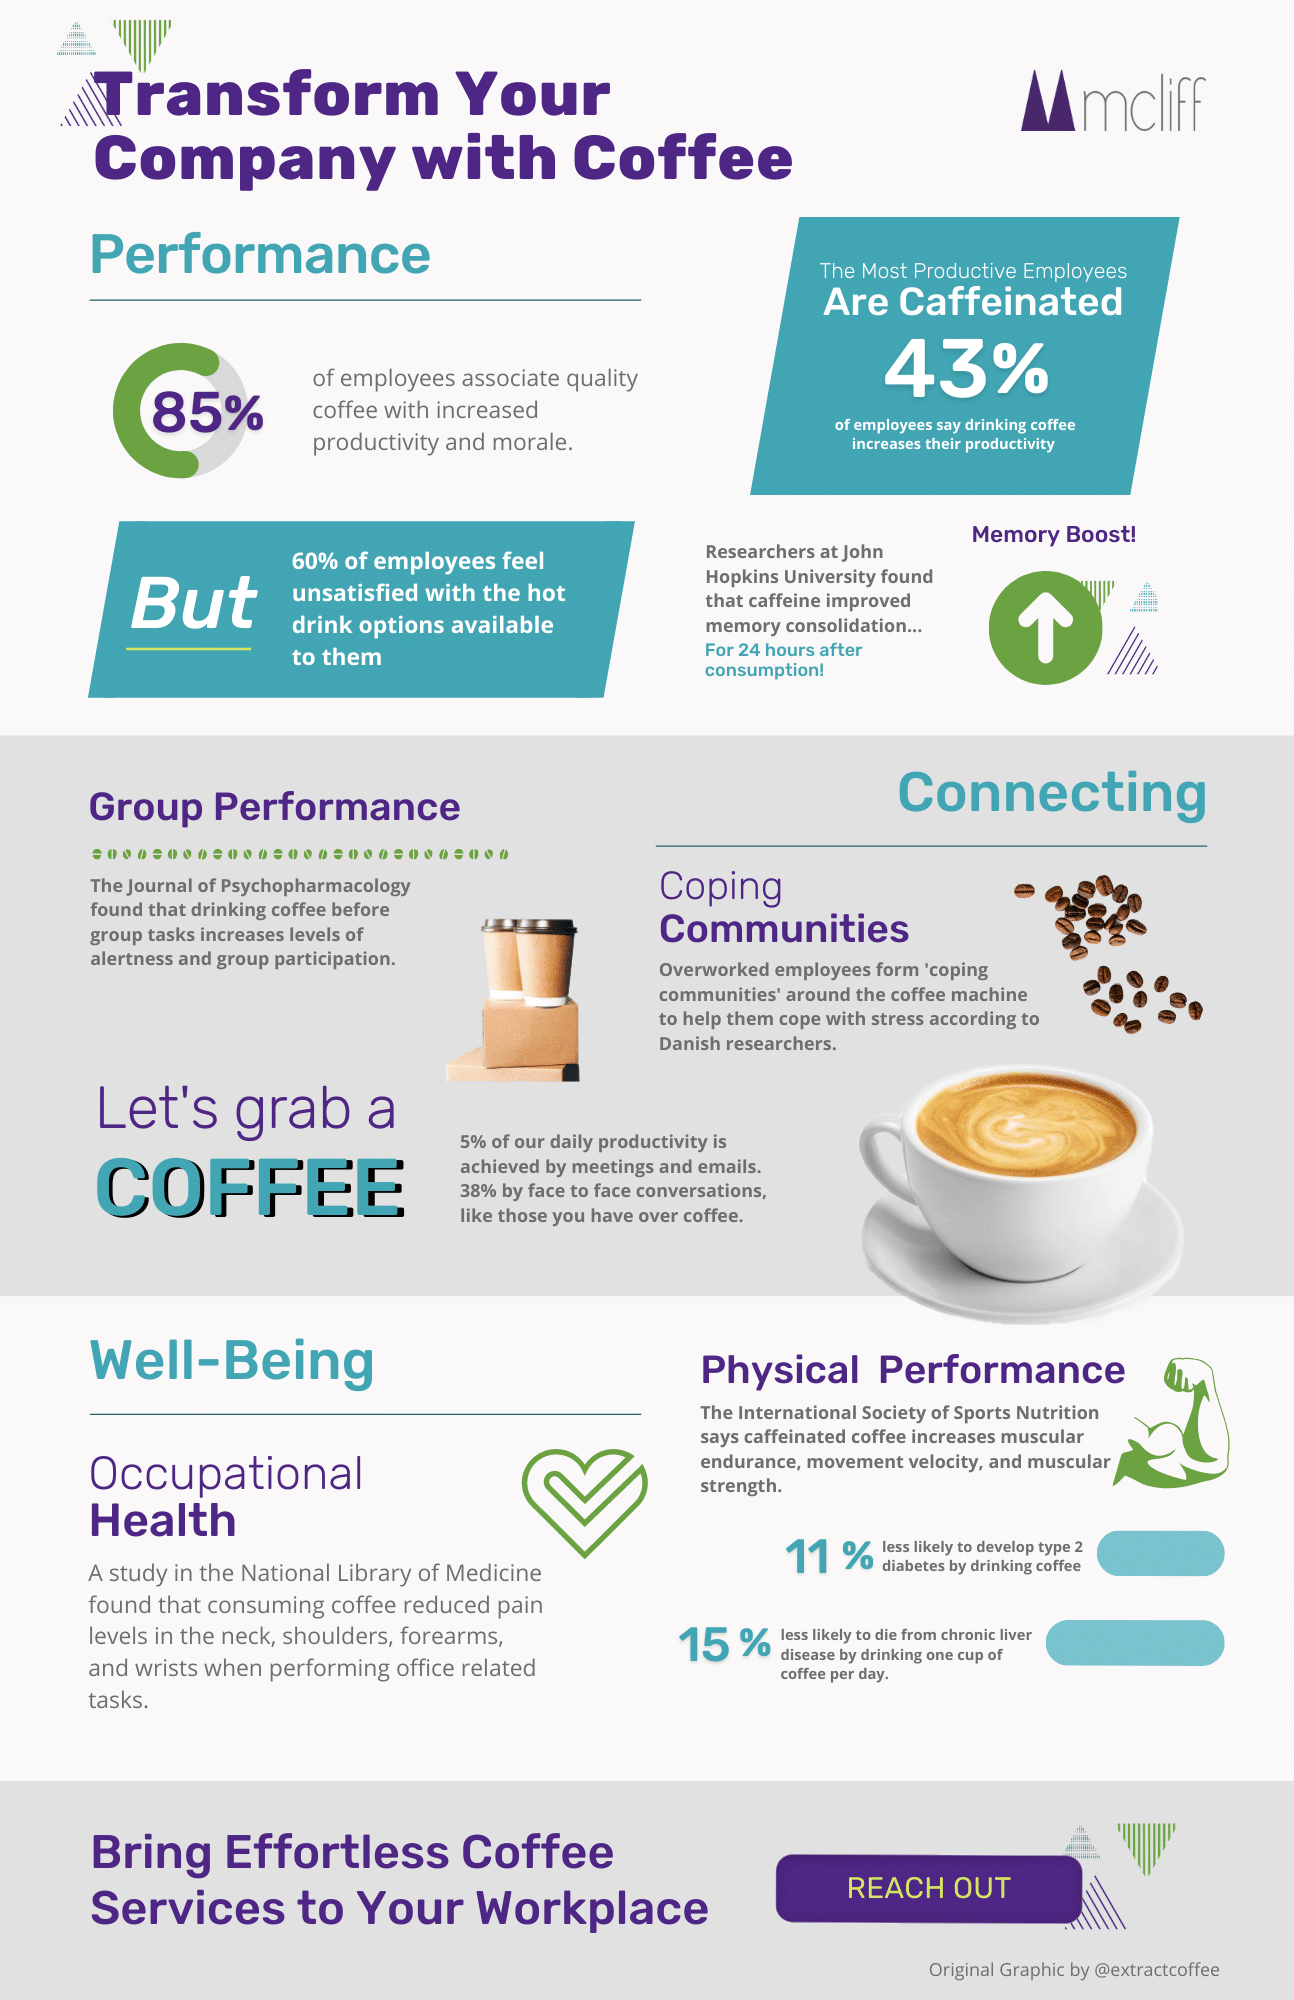 How can coffee transform your company